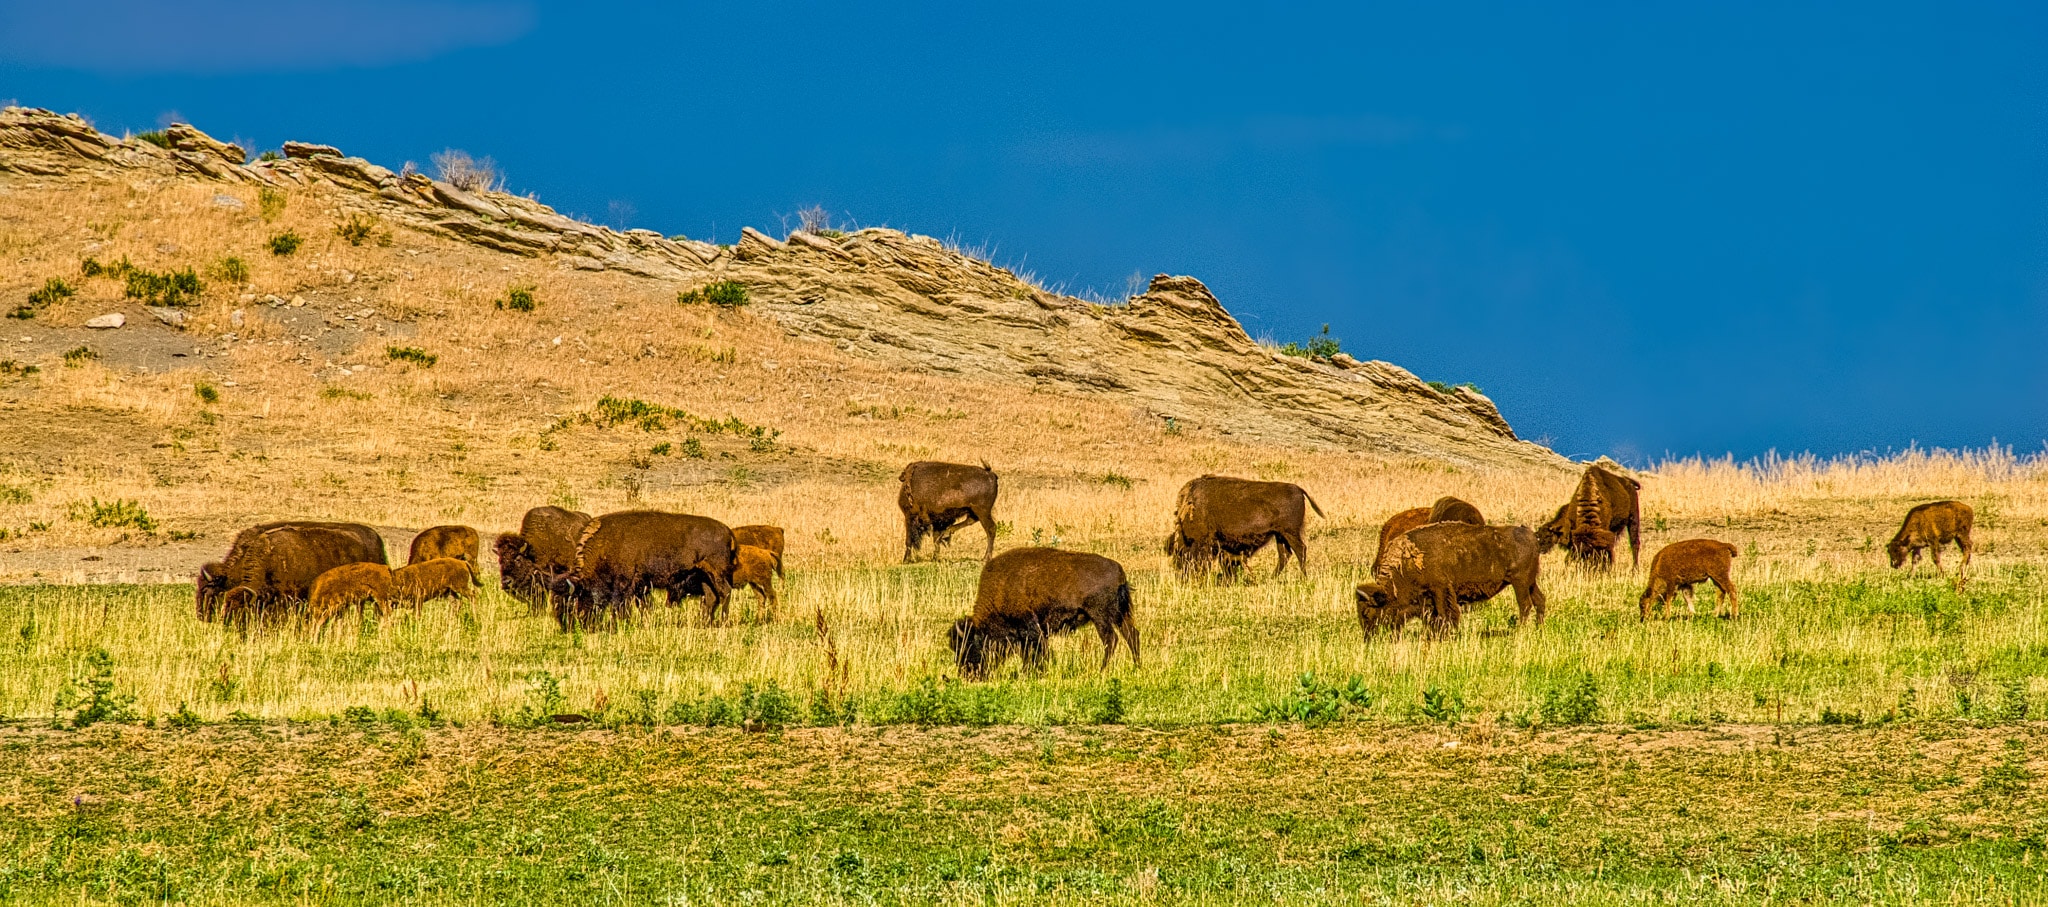 These bison are grazing in a field near Rabbit Mountain just outside the city of Boulder, Colorado.